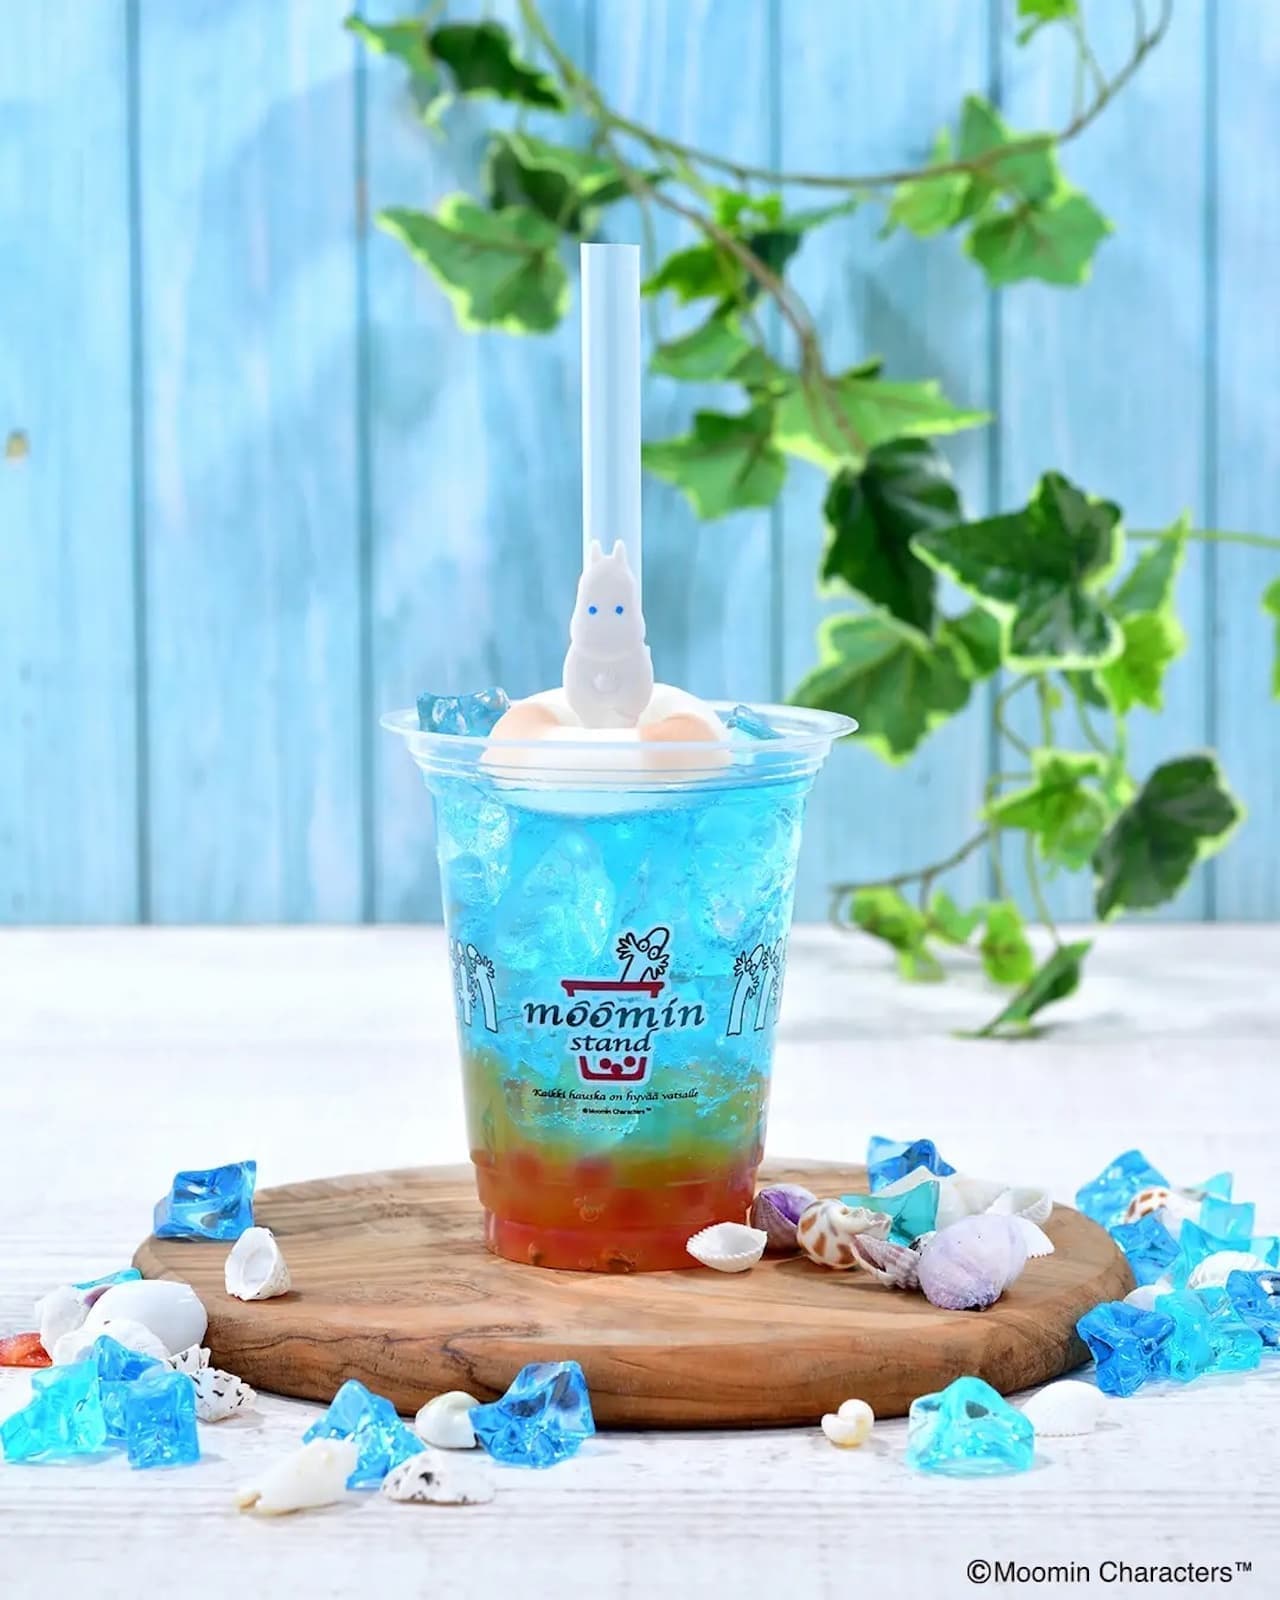 Moomin Cafe and Moomin Stand "Moomin float with soda".